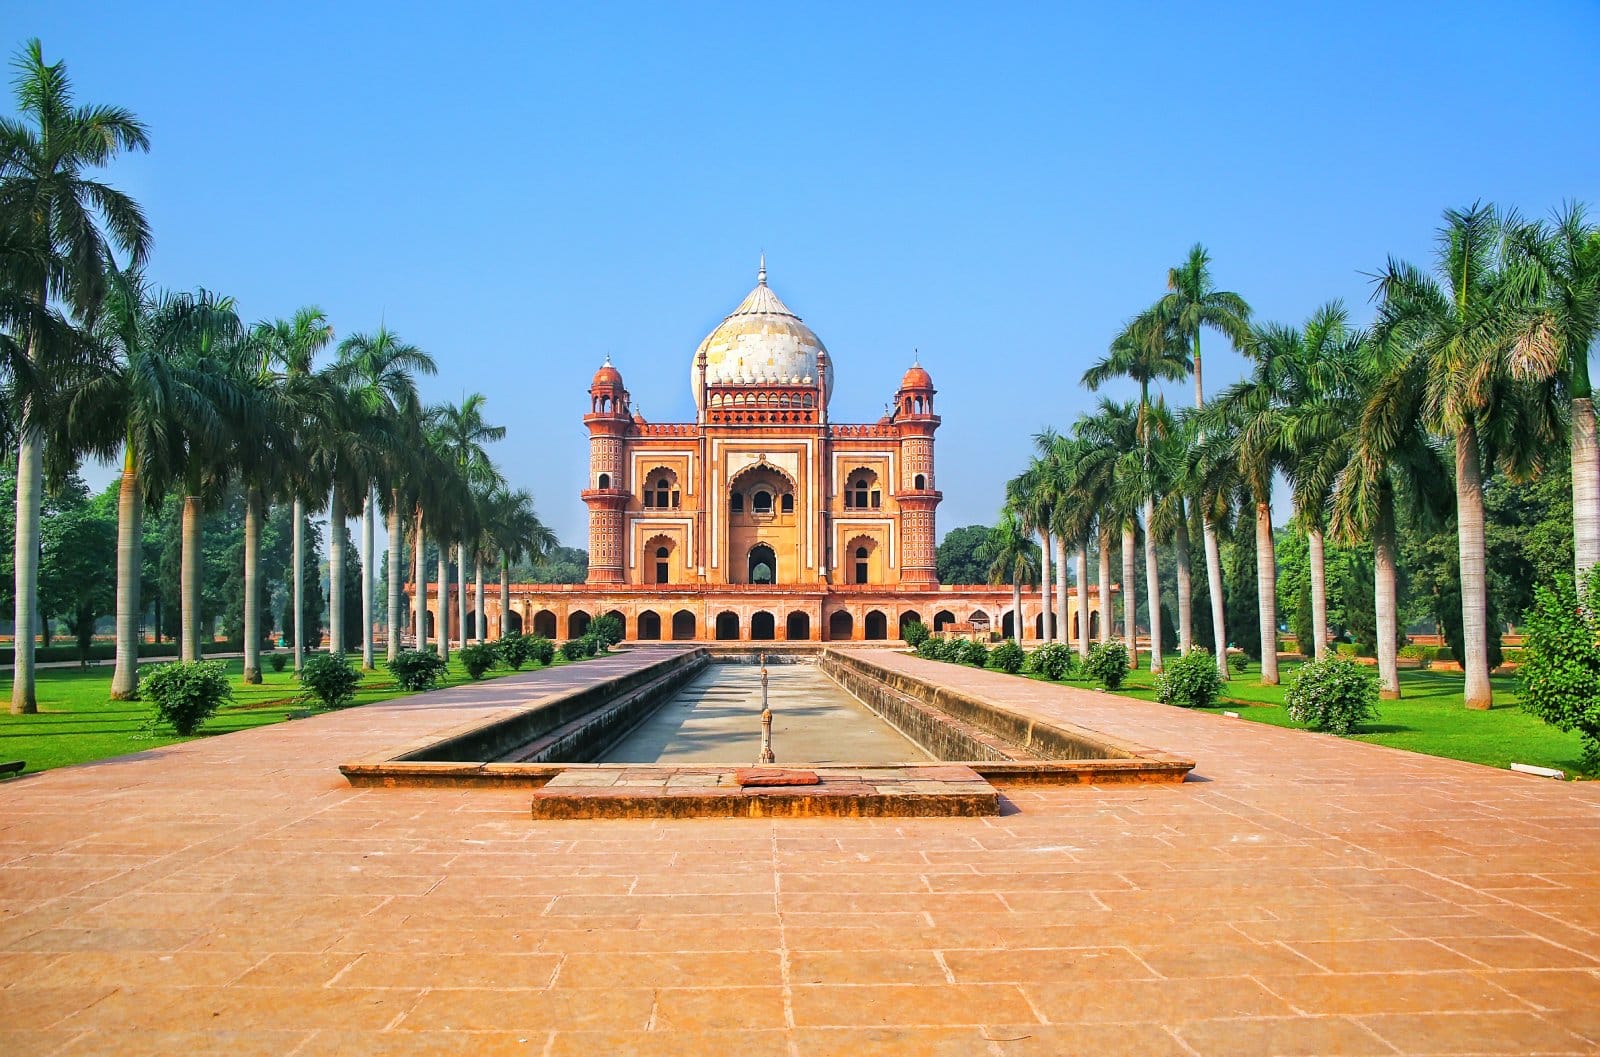 <p class="wp-caption-text">Image Credit: Shutterstock / Don Mammoser</p>  <p><span>Delhi, India’s capital, is where ancient history and modernity blend seamlessly. The city is divided into two parts: Old Delhi, a labyrinth of narrow lanes, age-old mosques, and bustling markets; and New Delhi, the imperial city created by the British Raj, characterized by wide boulevards, stately government buildings, and verdant gardens.</span></p>